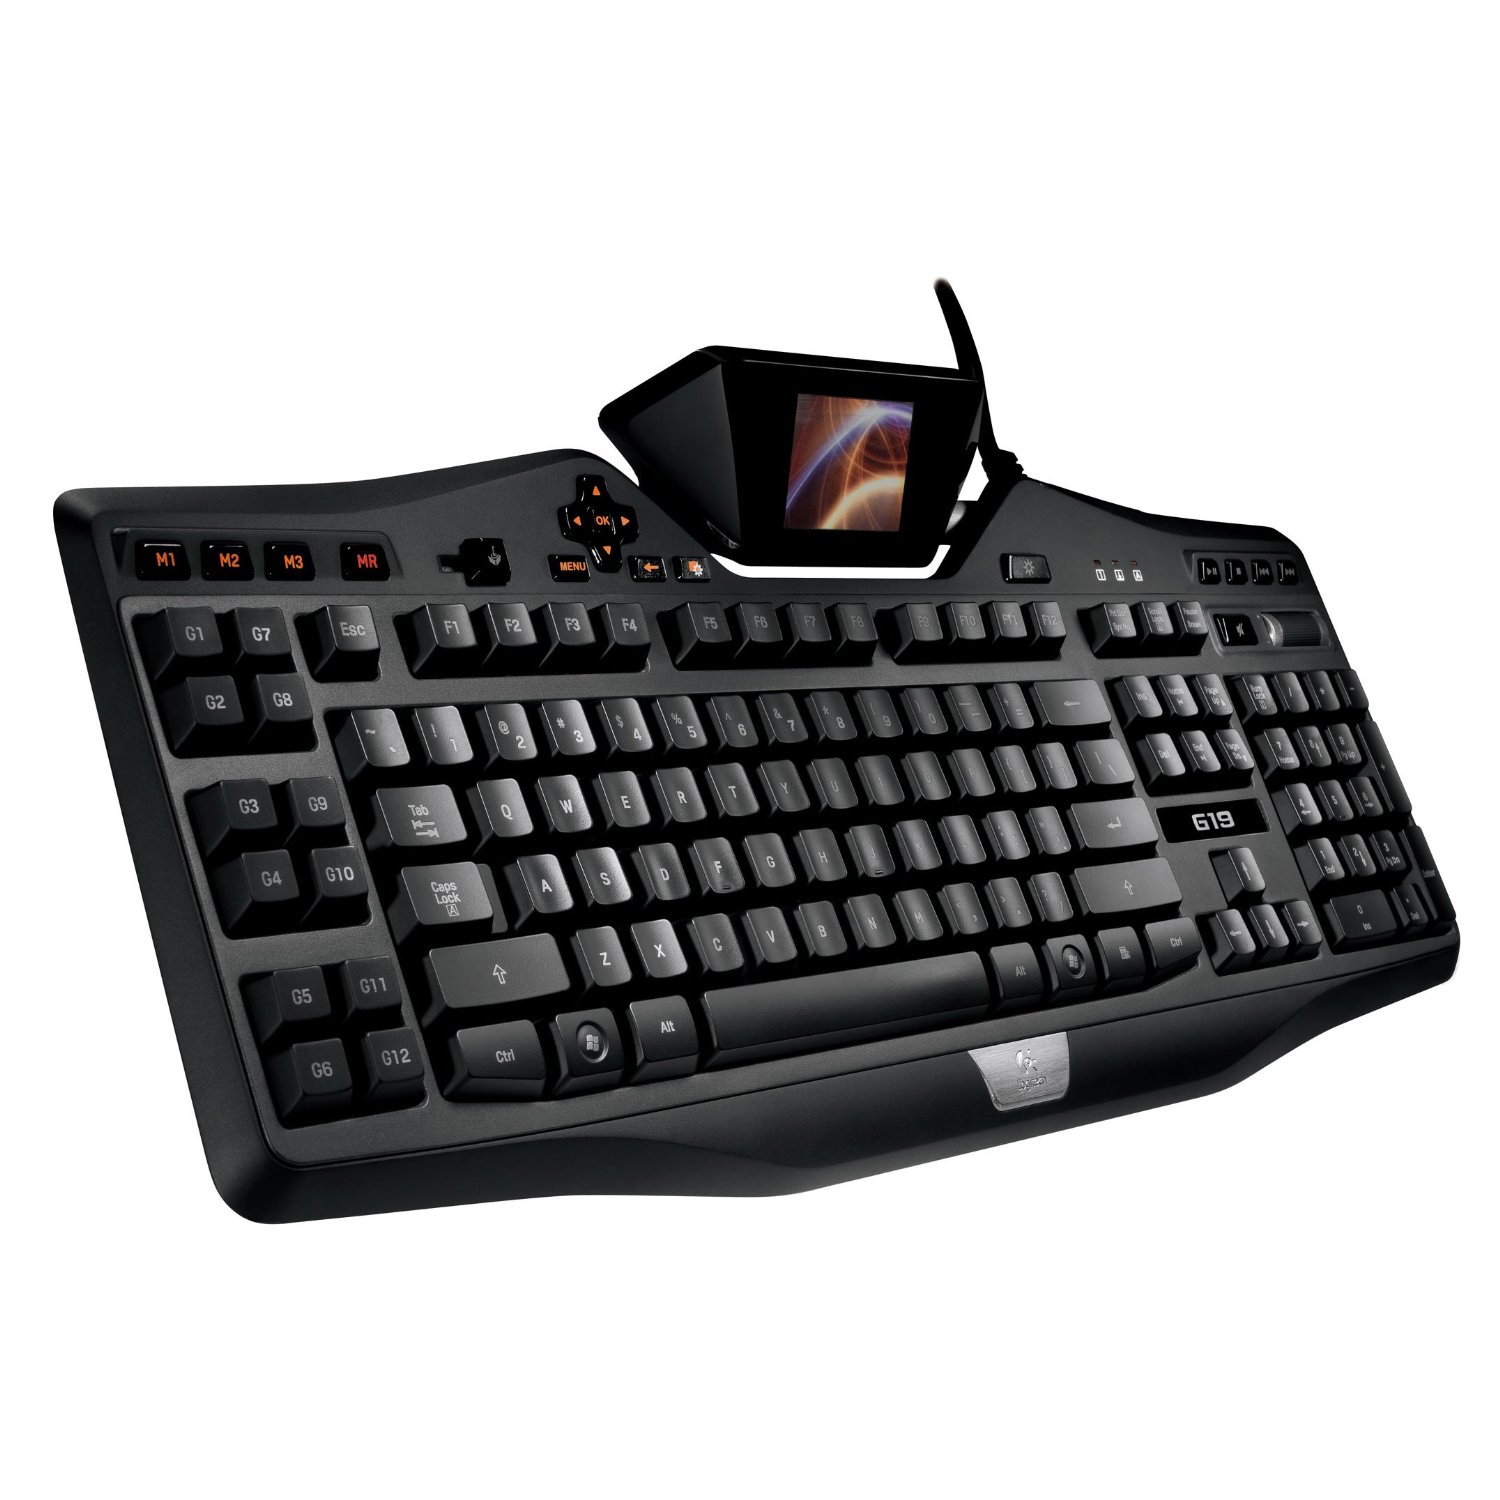 http://thetechjournal.com/wp-content/uploads/images/1110/1317696947-logitech-g19-programmable-gaming-keyboard-with-color-display-1.jpg